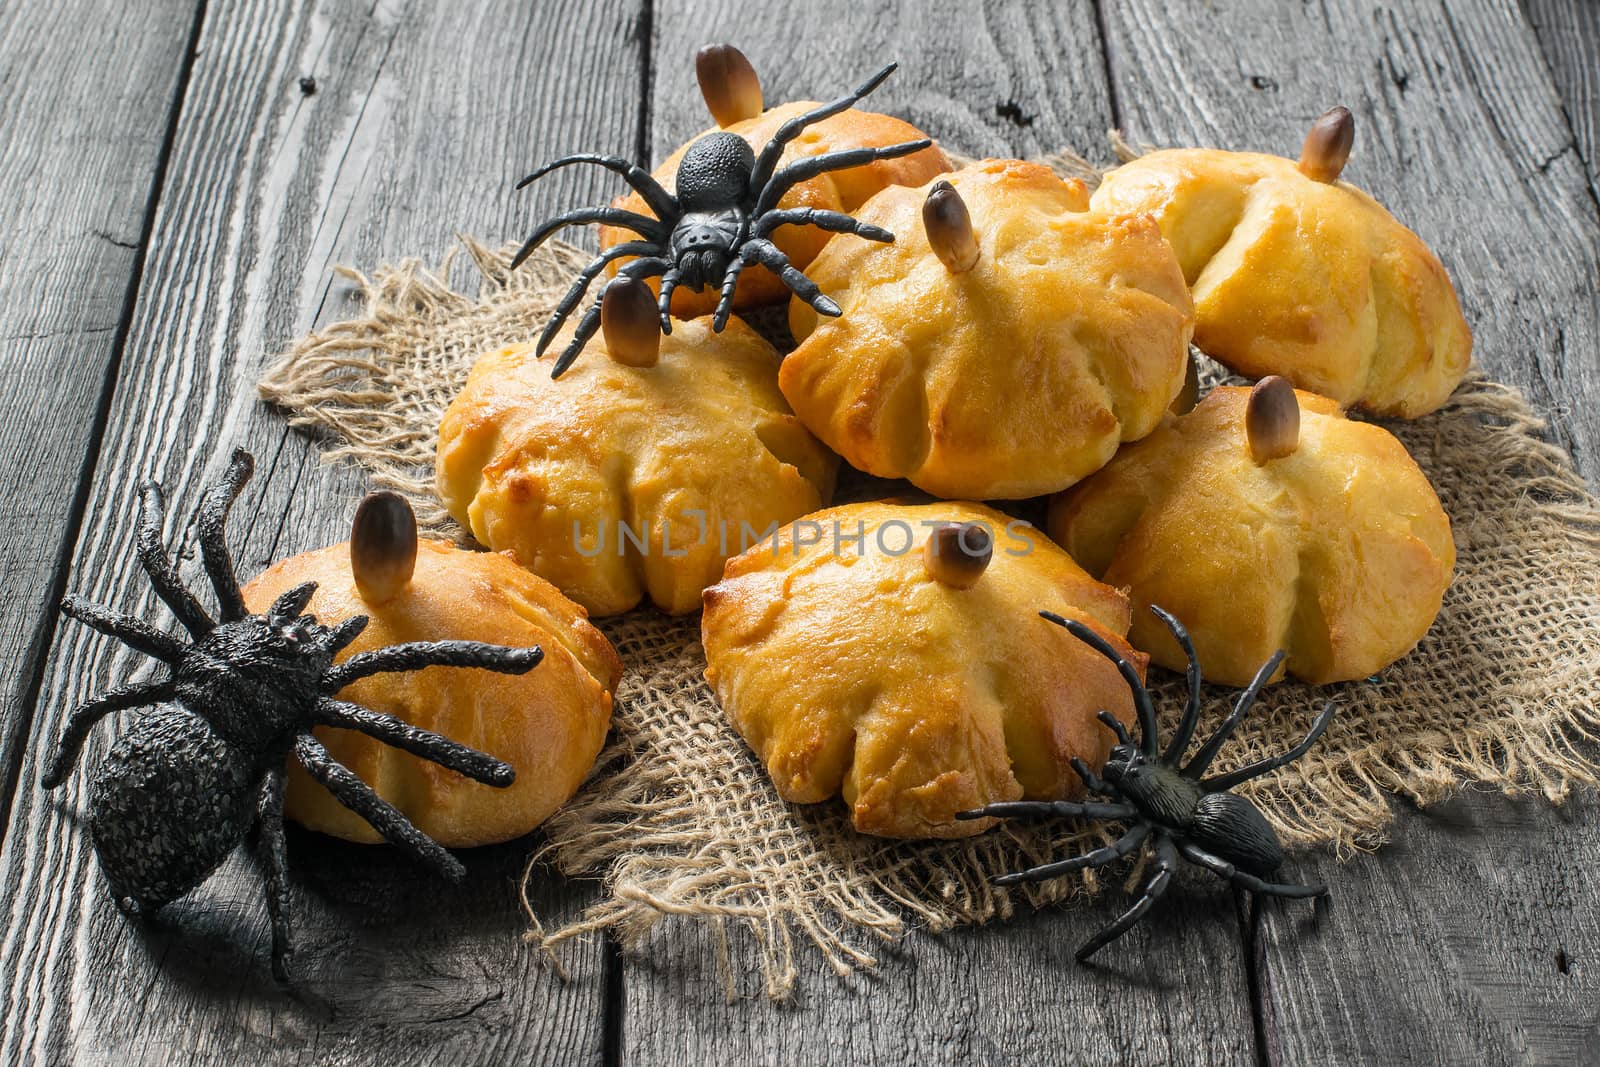 Homemade sweet pumpkin buns. Original baking in form of pumpkin and black toy spiders. Symbols Halloween. Idea of design meal for Halloween party. Scary and funny Halloween food